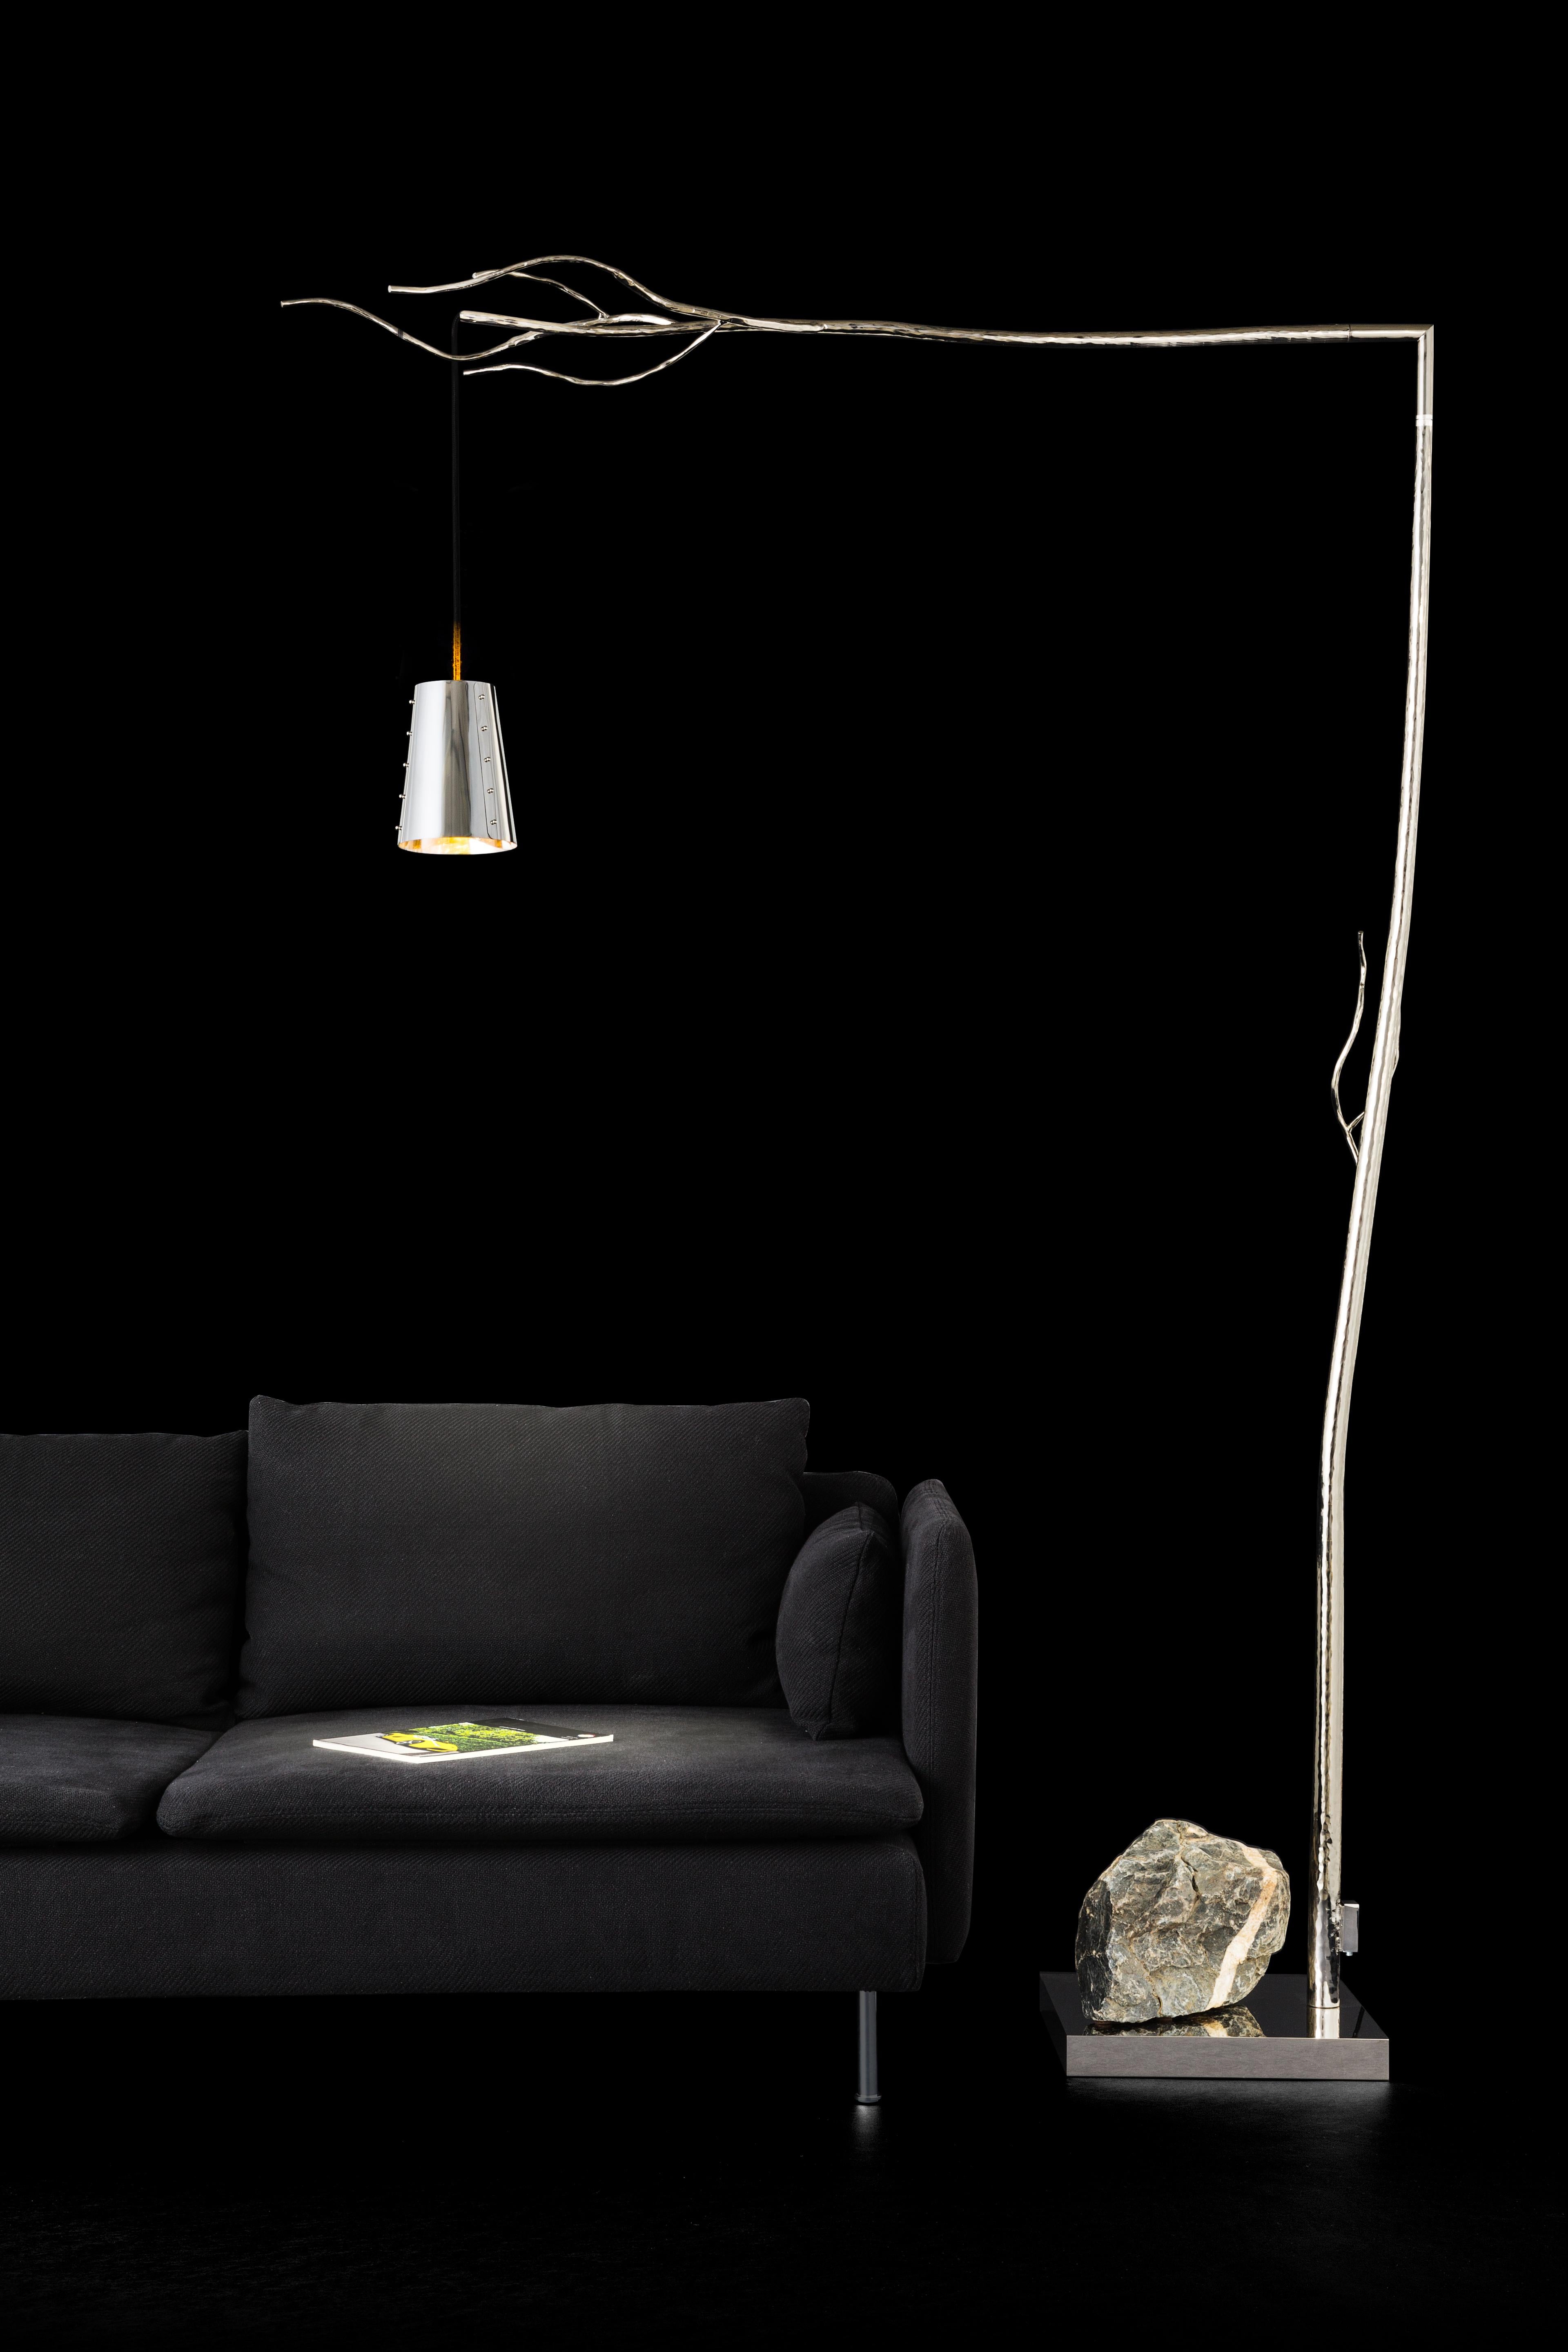 The Flintstone is a modern floor lamp in a nickel finish designed by Wiliam Brand, founder of Brand van Egmond. 

Retracing our steps through the millennia to the beginning of times, we find ourselves back at the fireplace in the prehistoric cave.